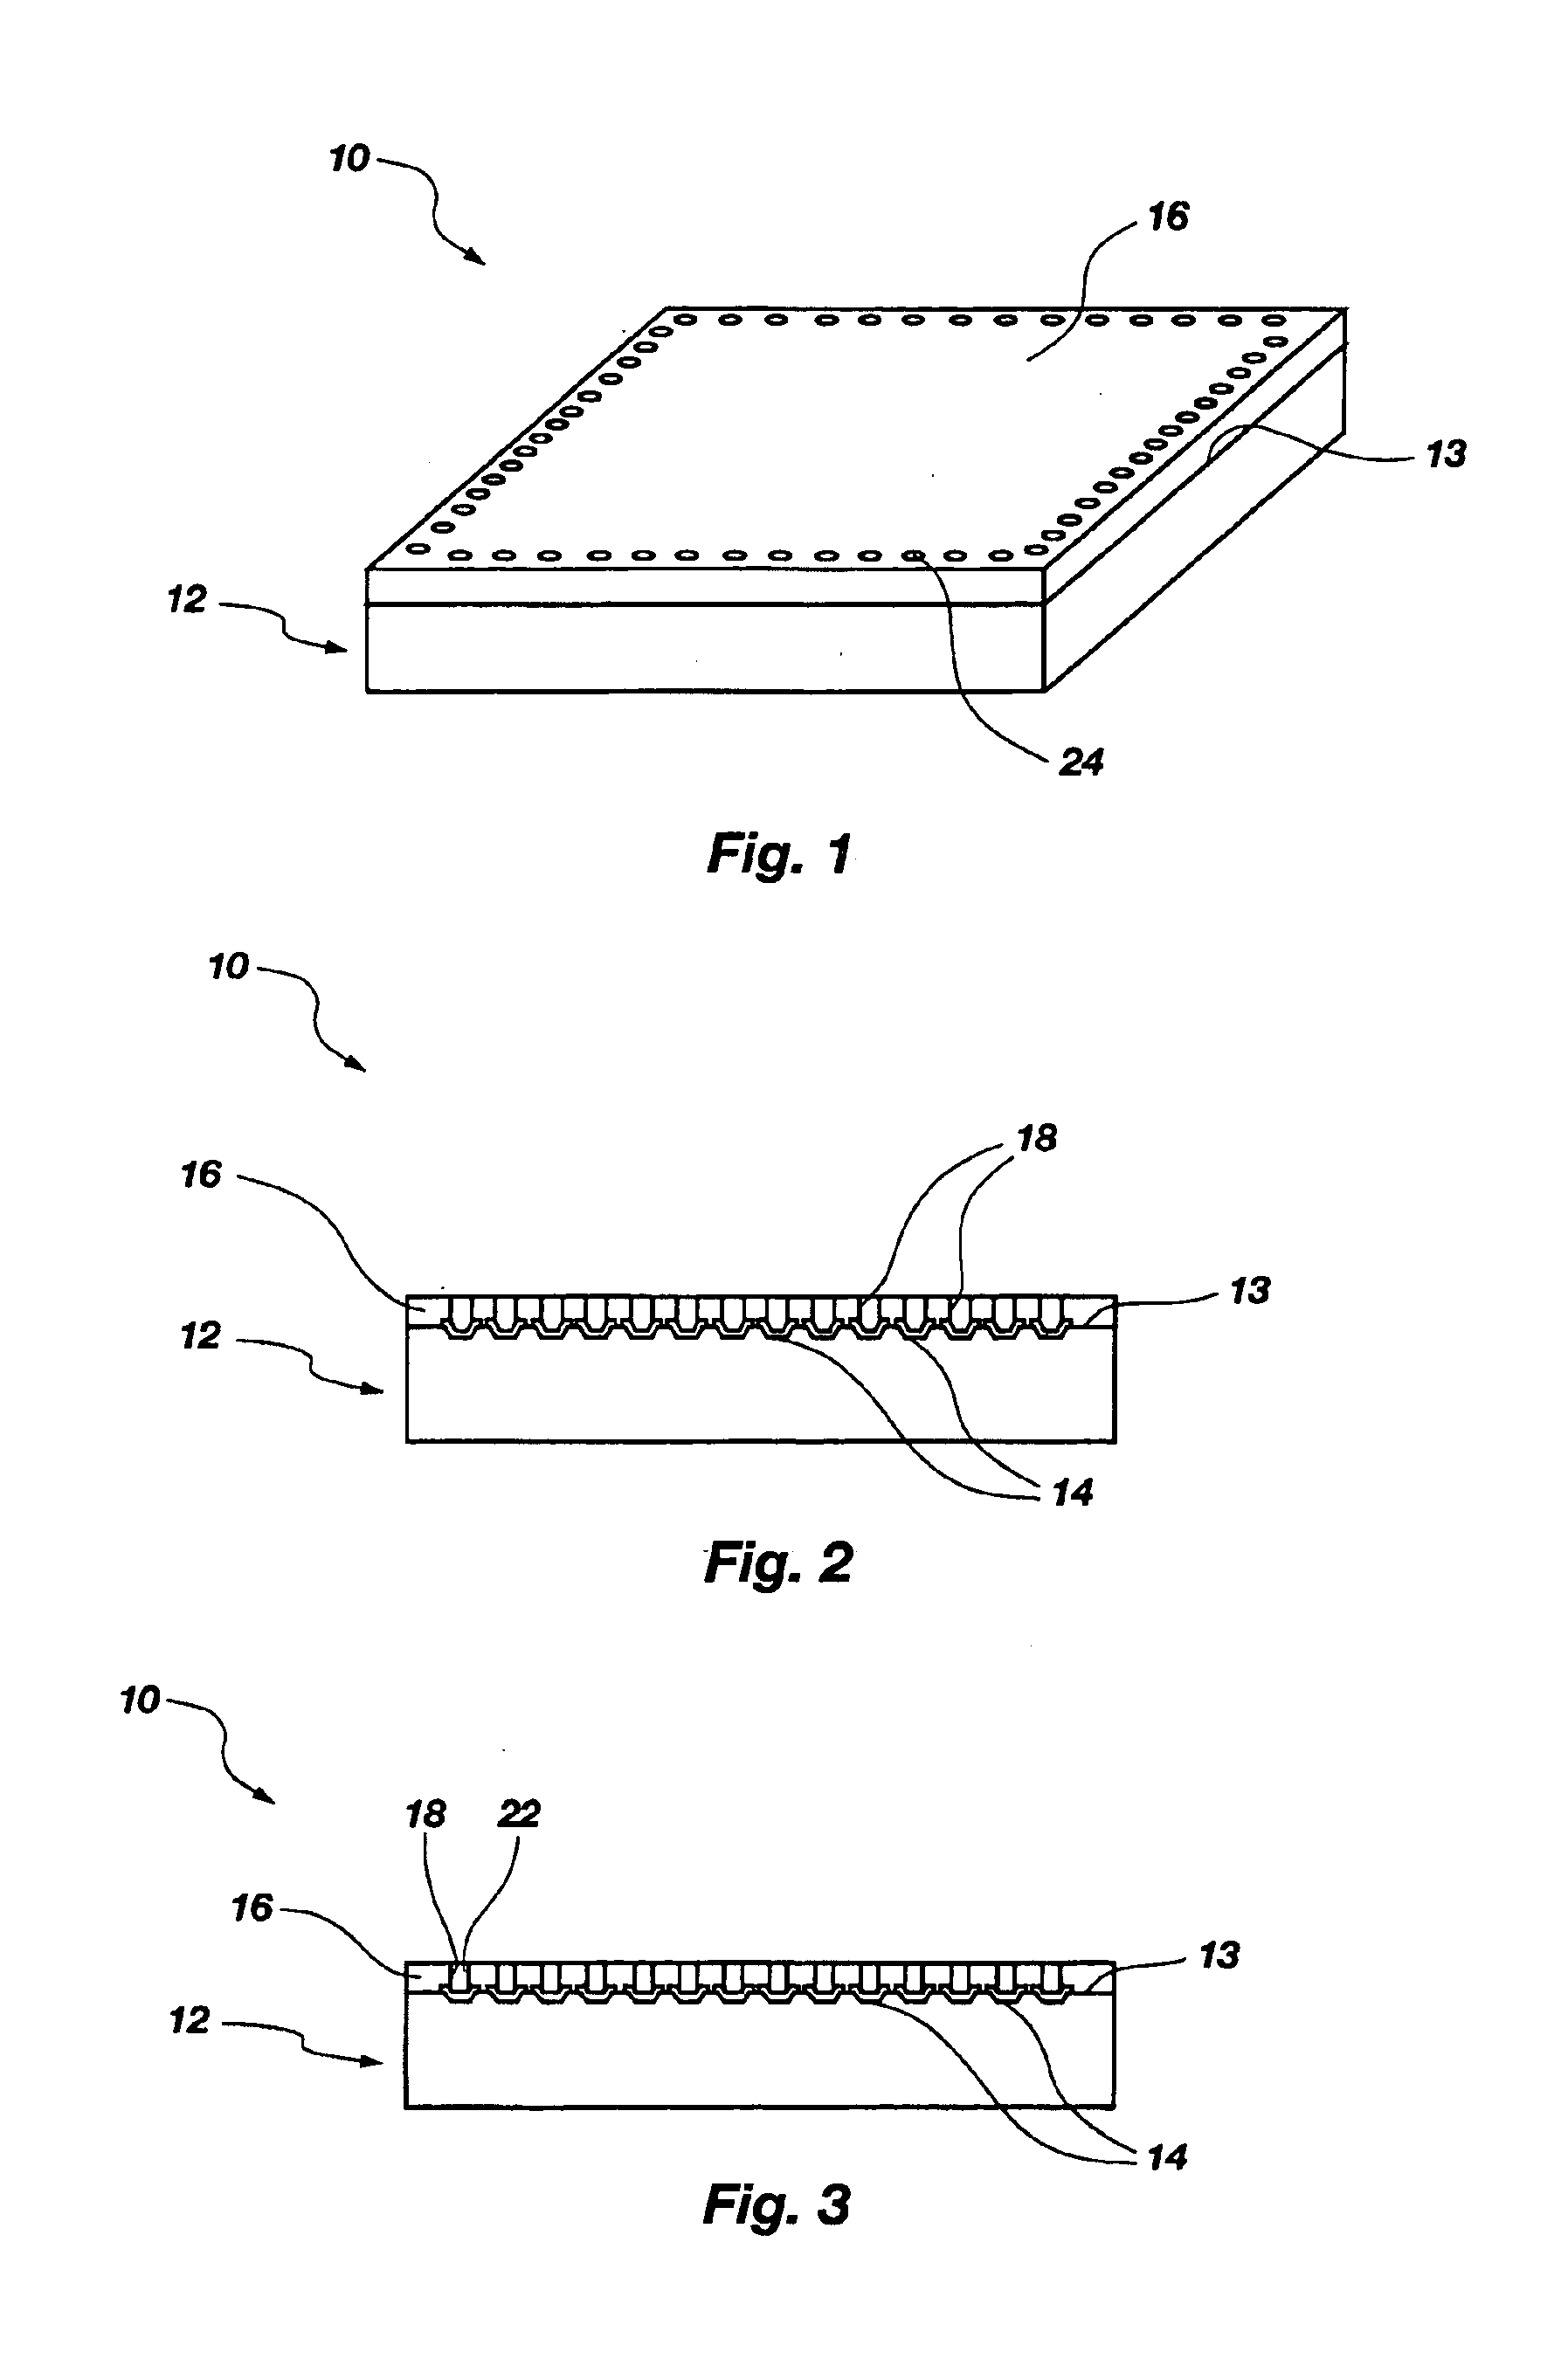 Method of disposing conductive bumps onto a semiconductor device